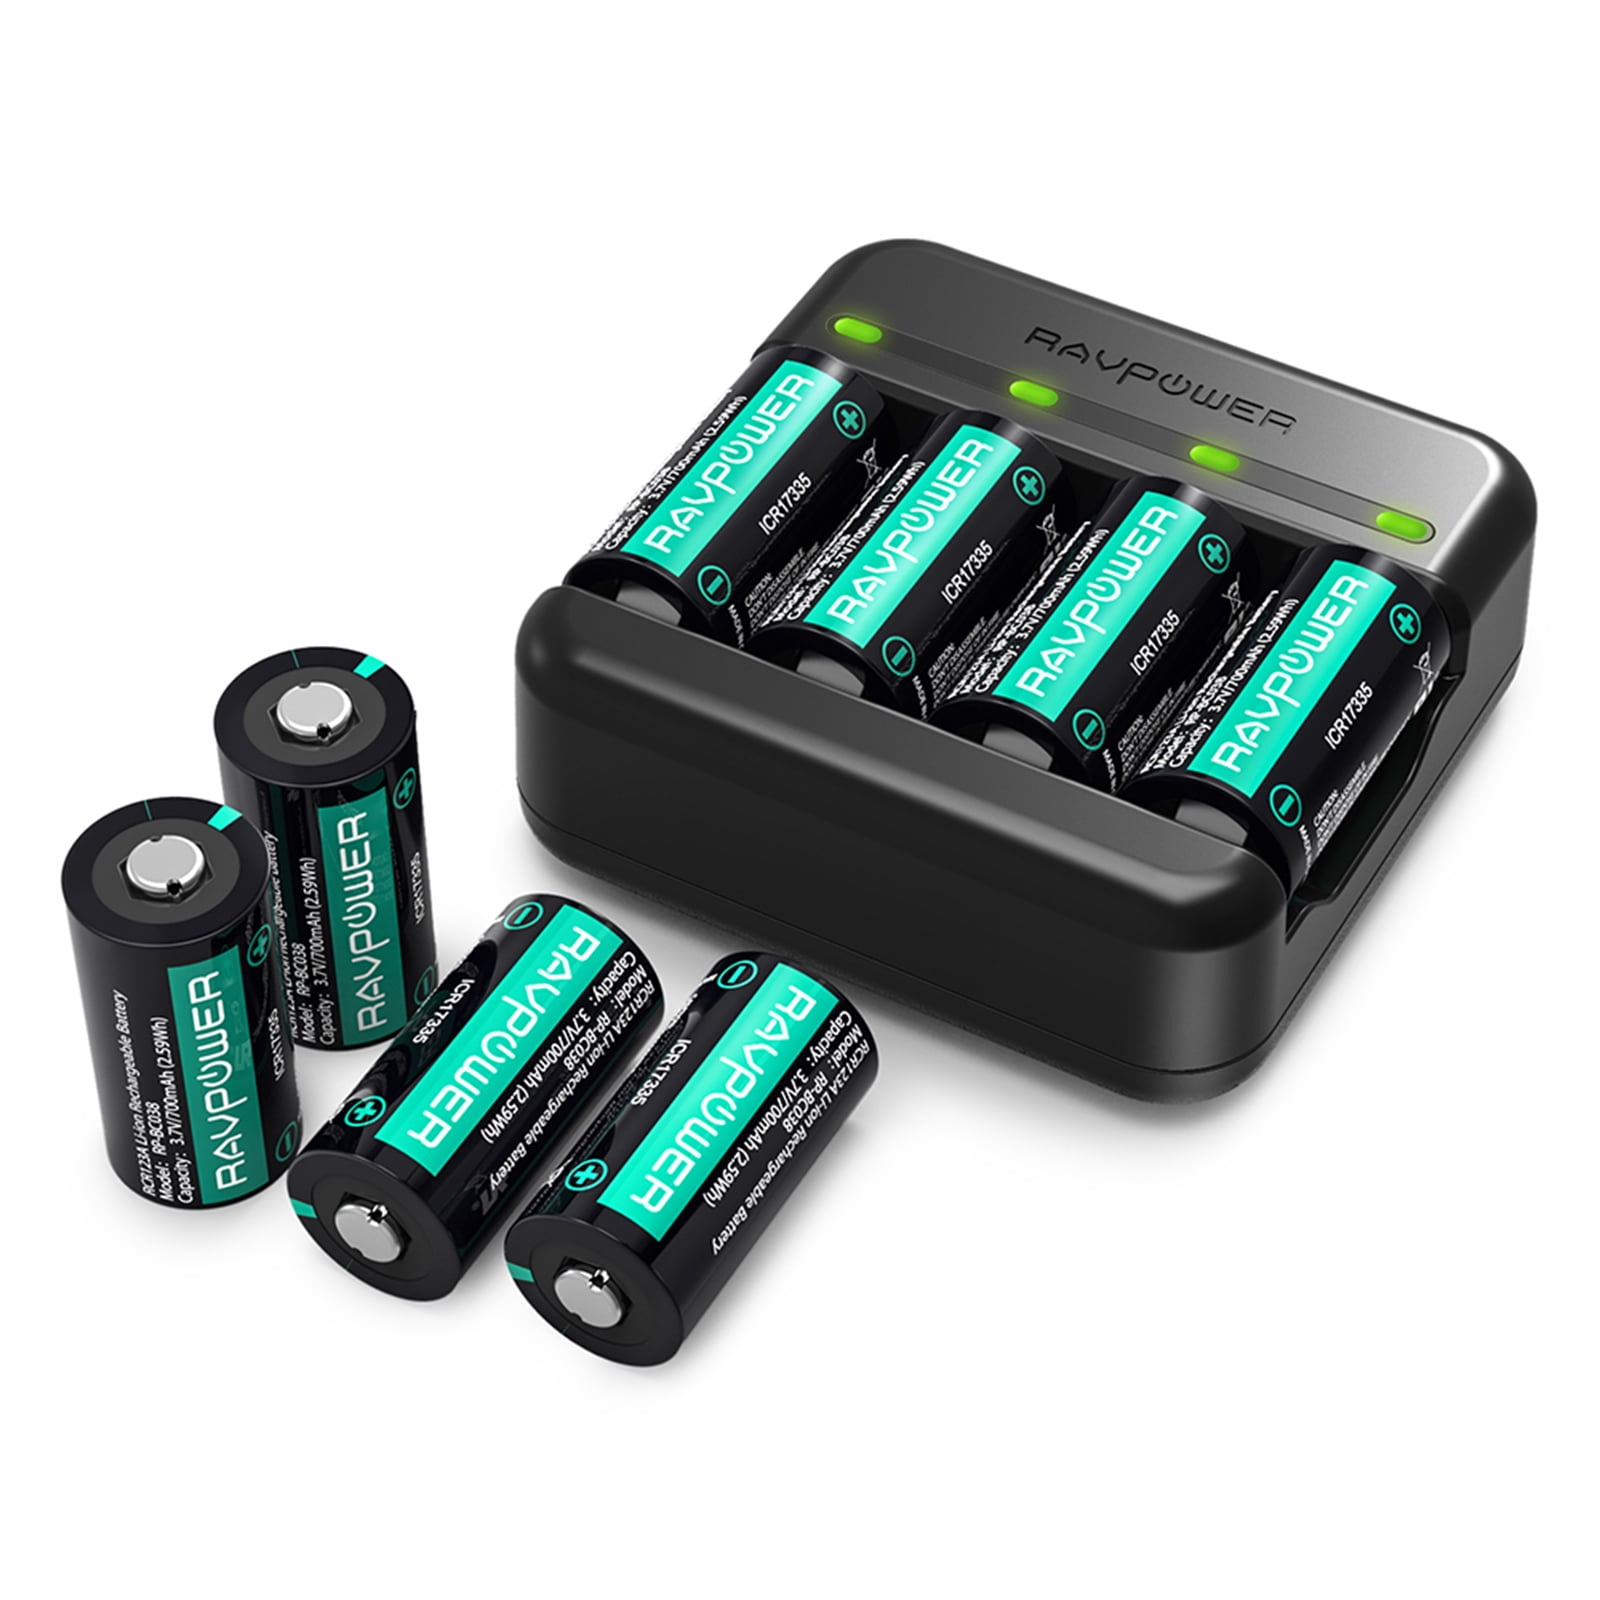 Lithium 500+Times Battery Carica 500 High Power 3V Charger Rechargeable Li-Ion CR 2, CR123 Charger + 4 Batteries, CR123